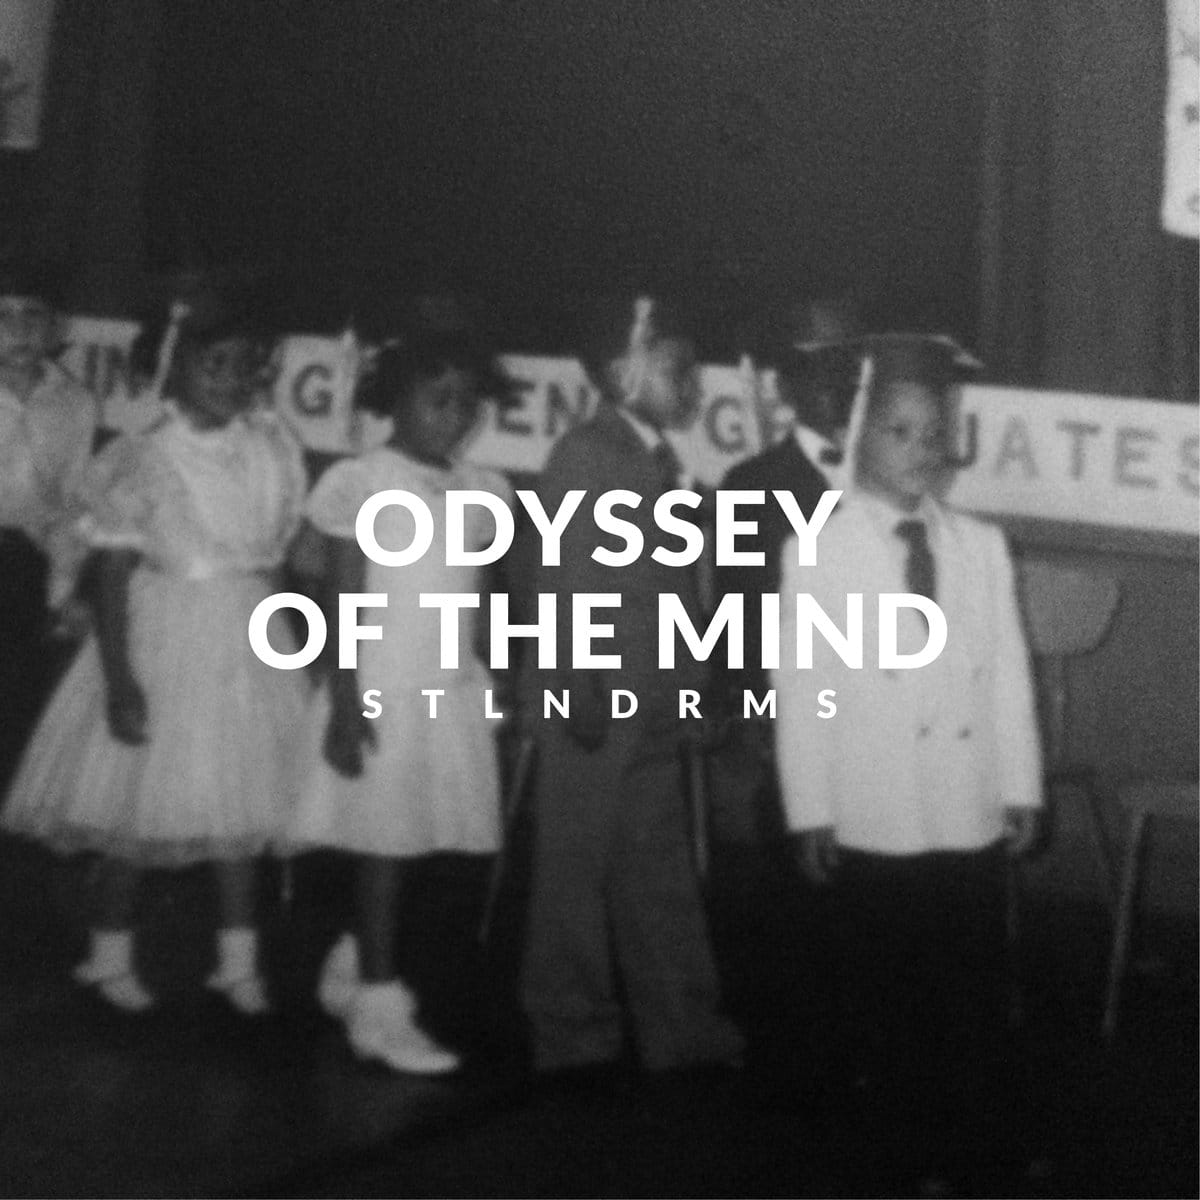 STLNDRMS - "Odyssey of the Mind" (Release)